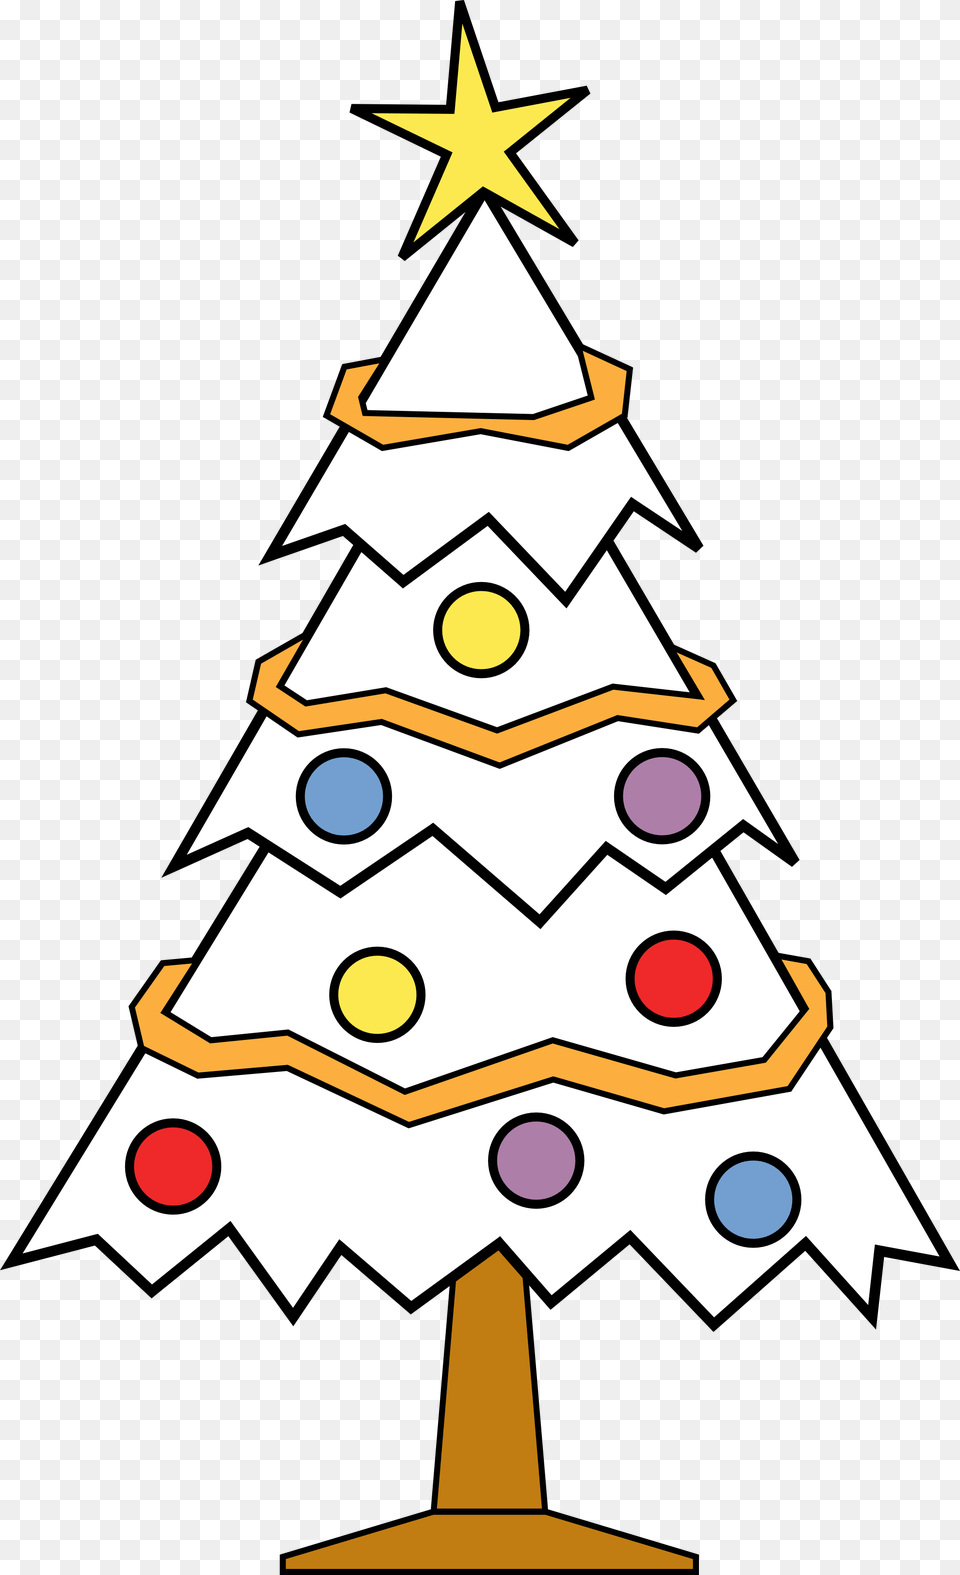 Clip Art Of Christmas Tree, Star Symbol, Symbol, Christmas Decorations, Festival Free Png Download